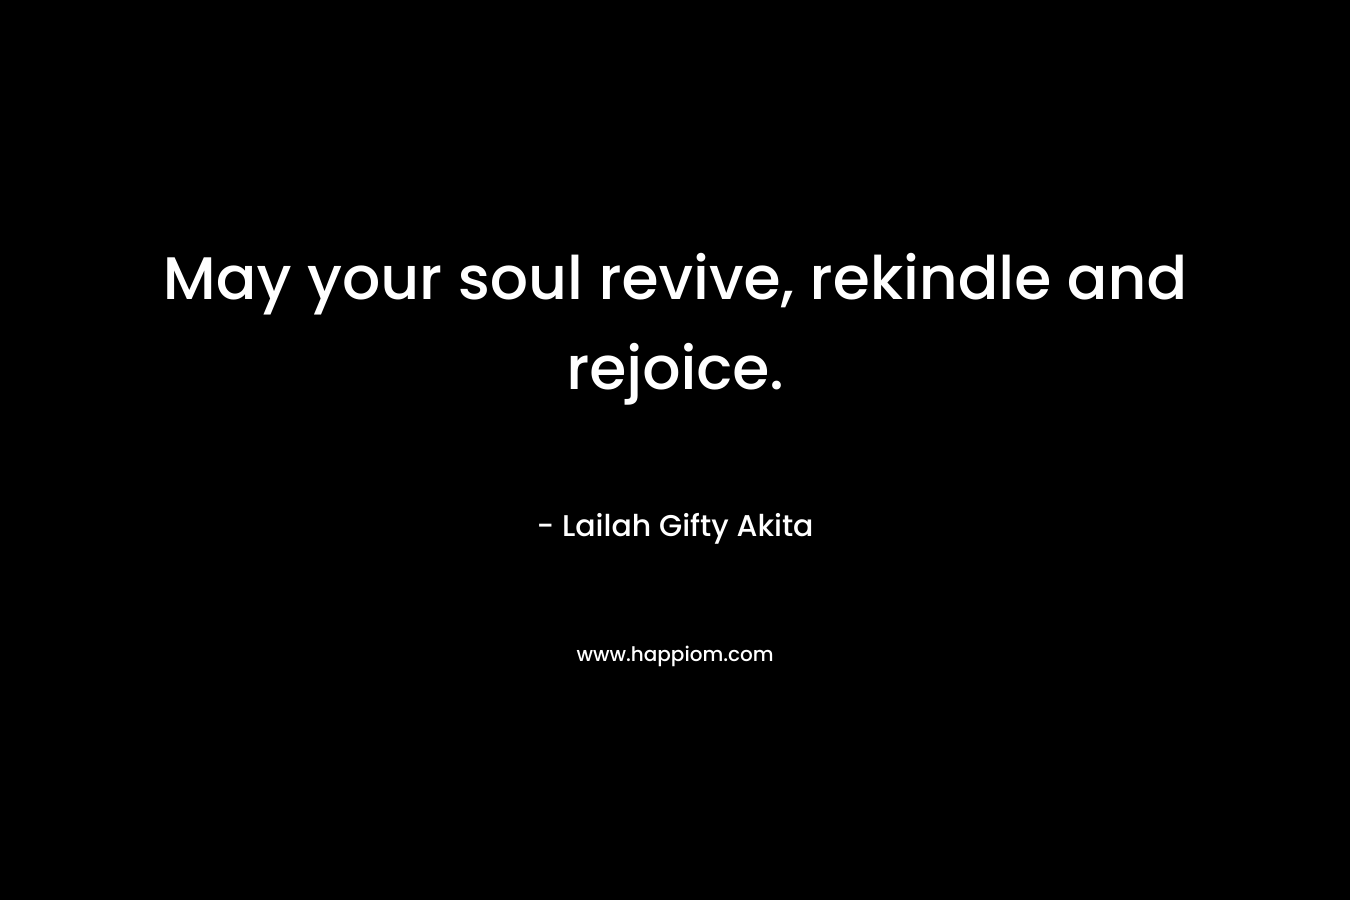 May your soul revive, rekindle and rejoice. – Lailah Gifty Akita